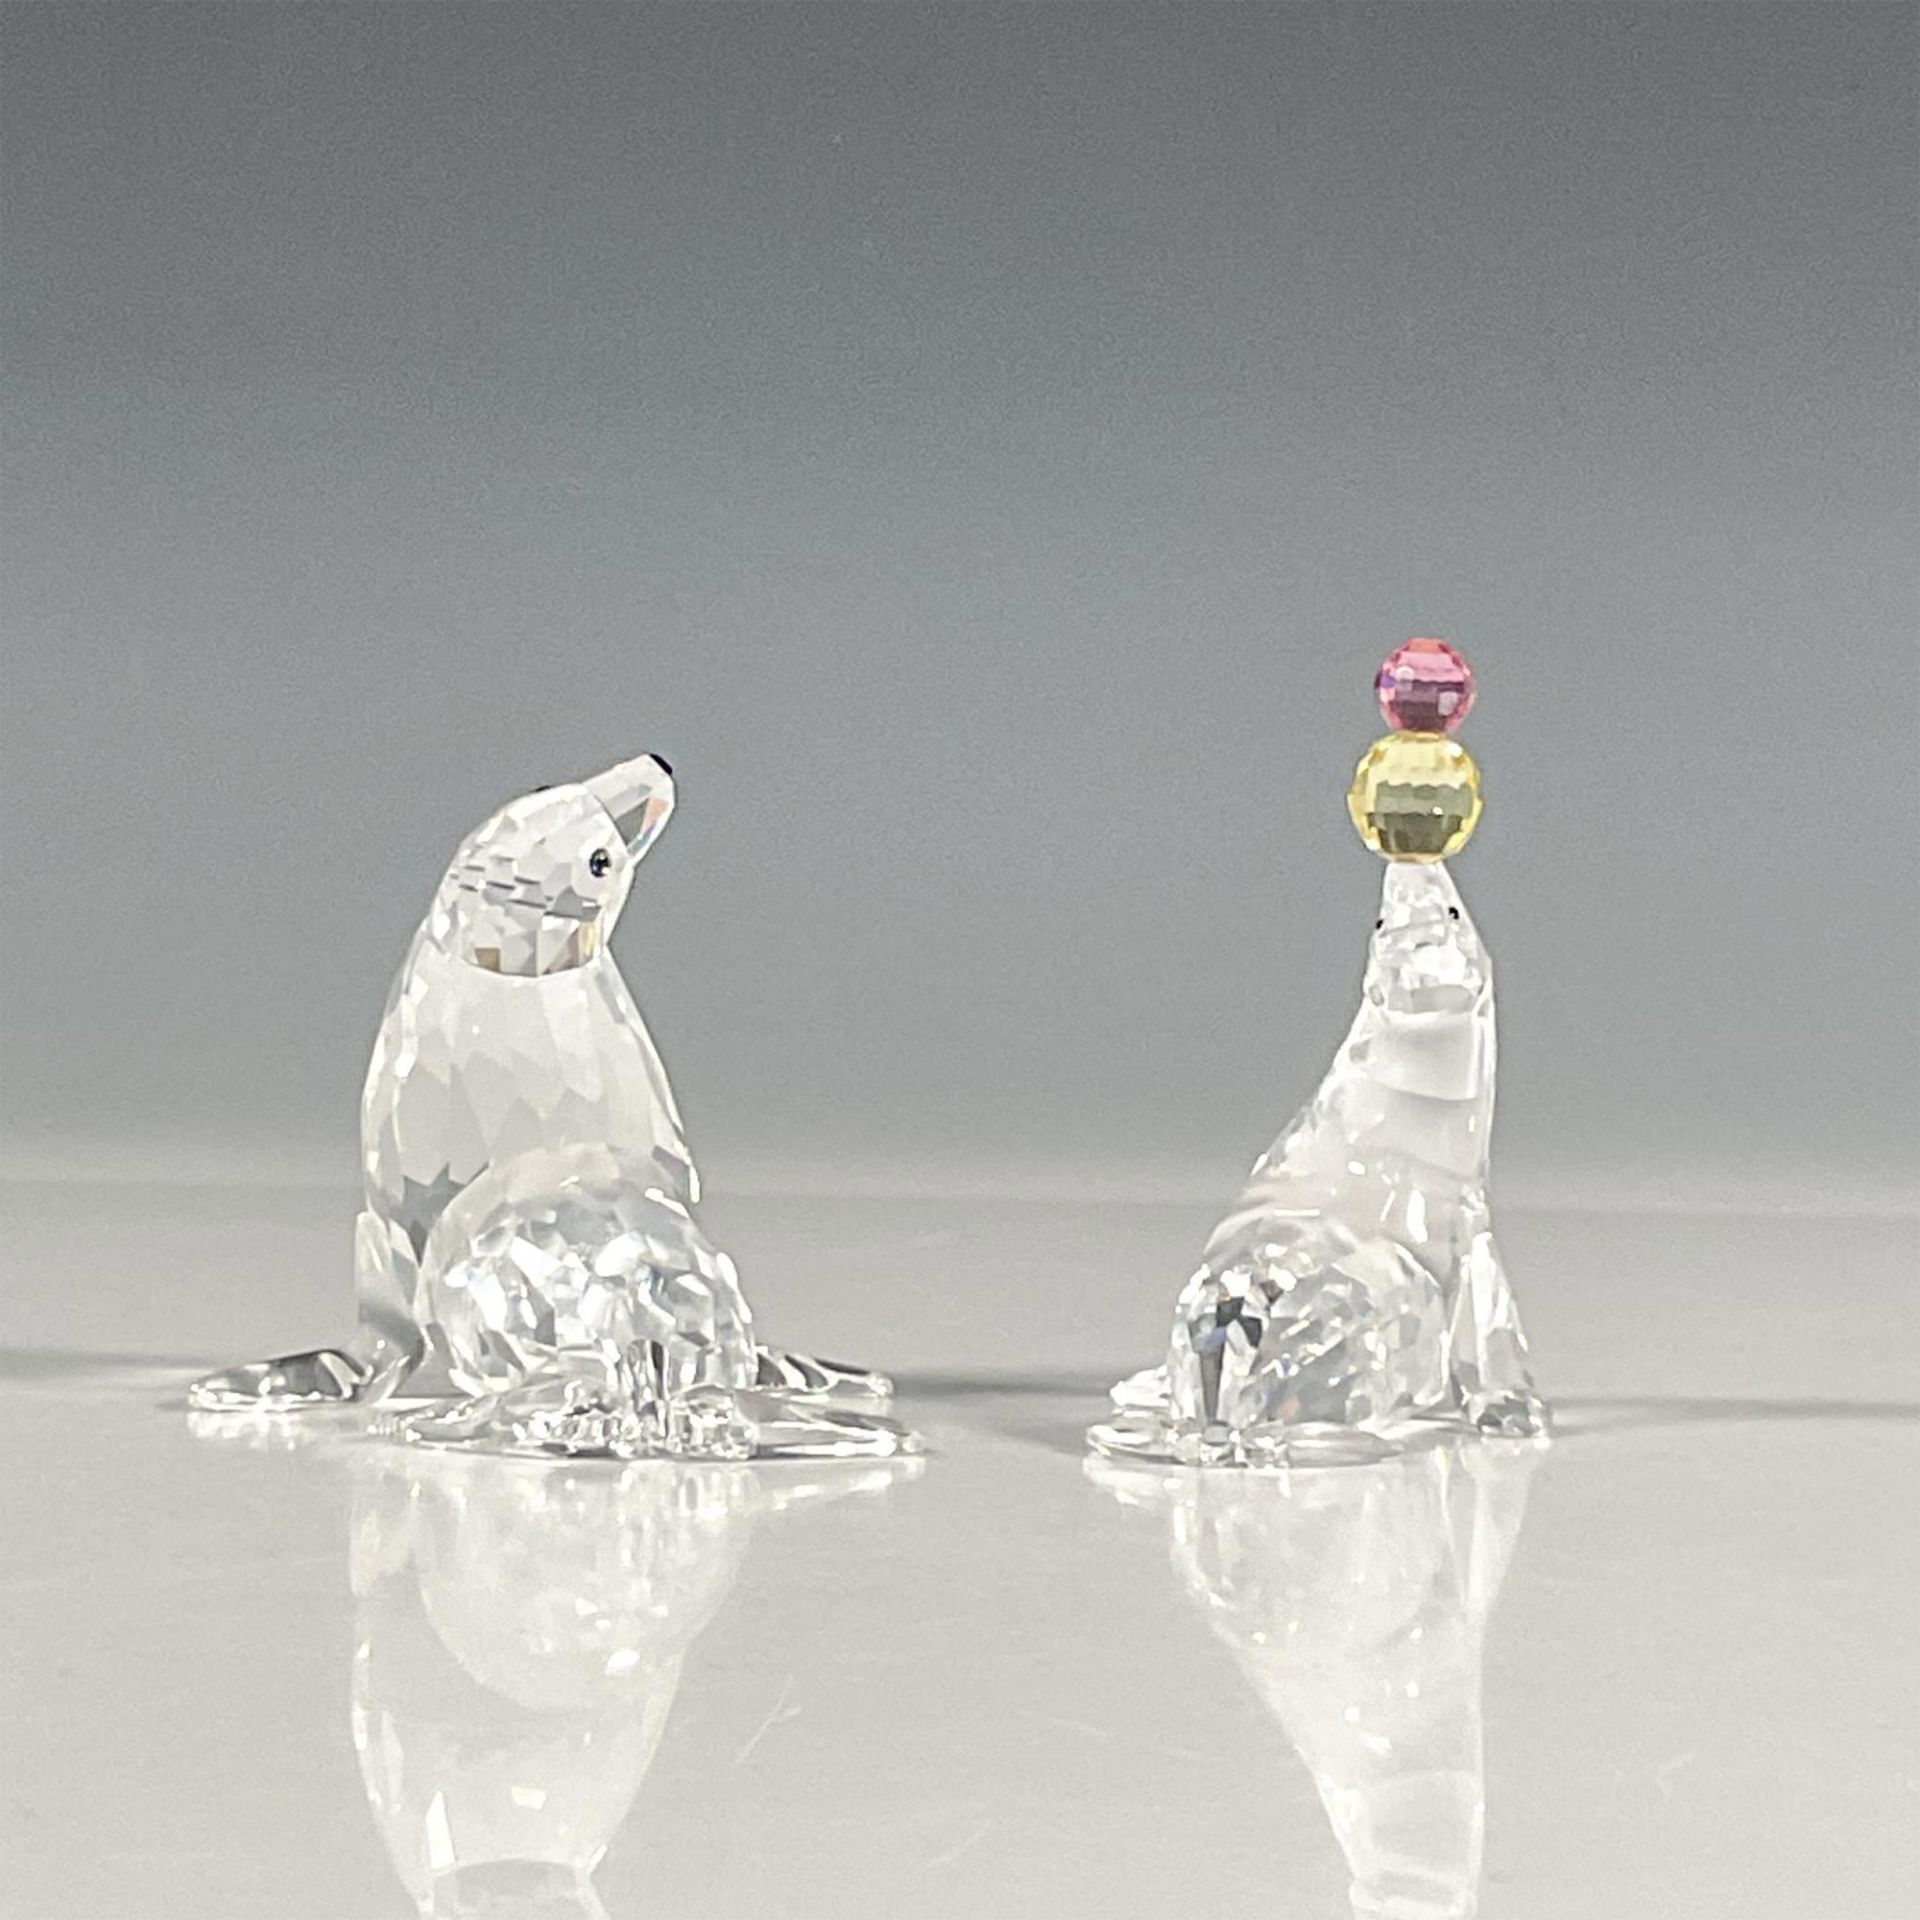 2pc Swarovski Silver Crystal Figurines, Seal and Sealion - Image 3 of 5